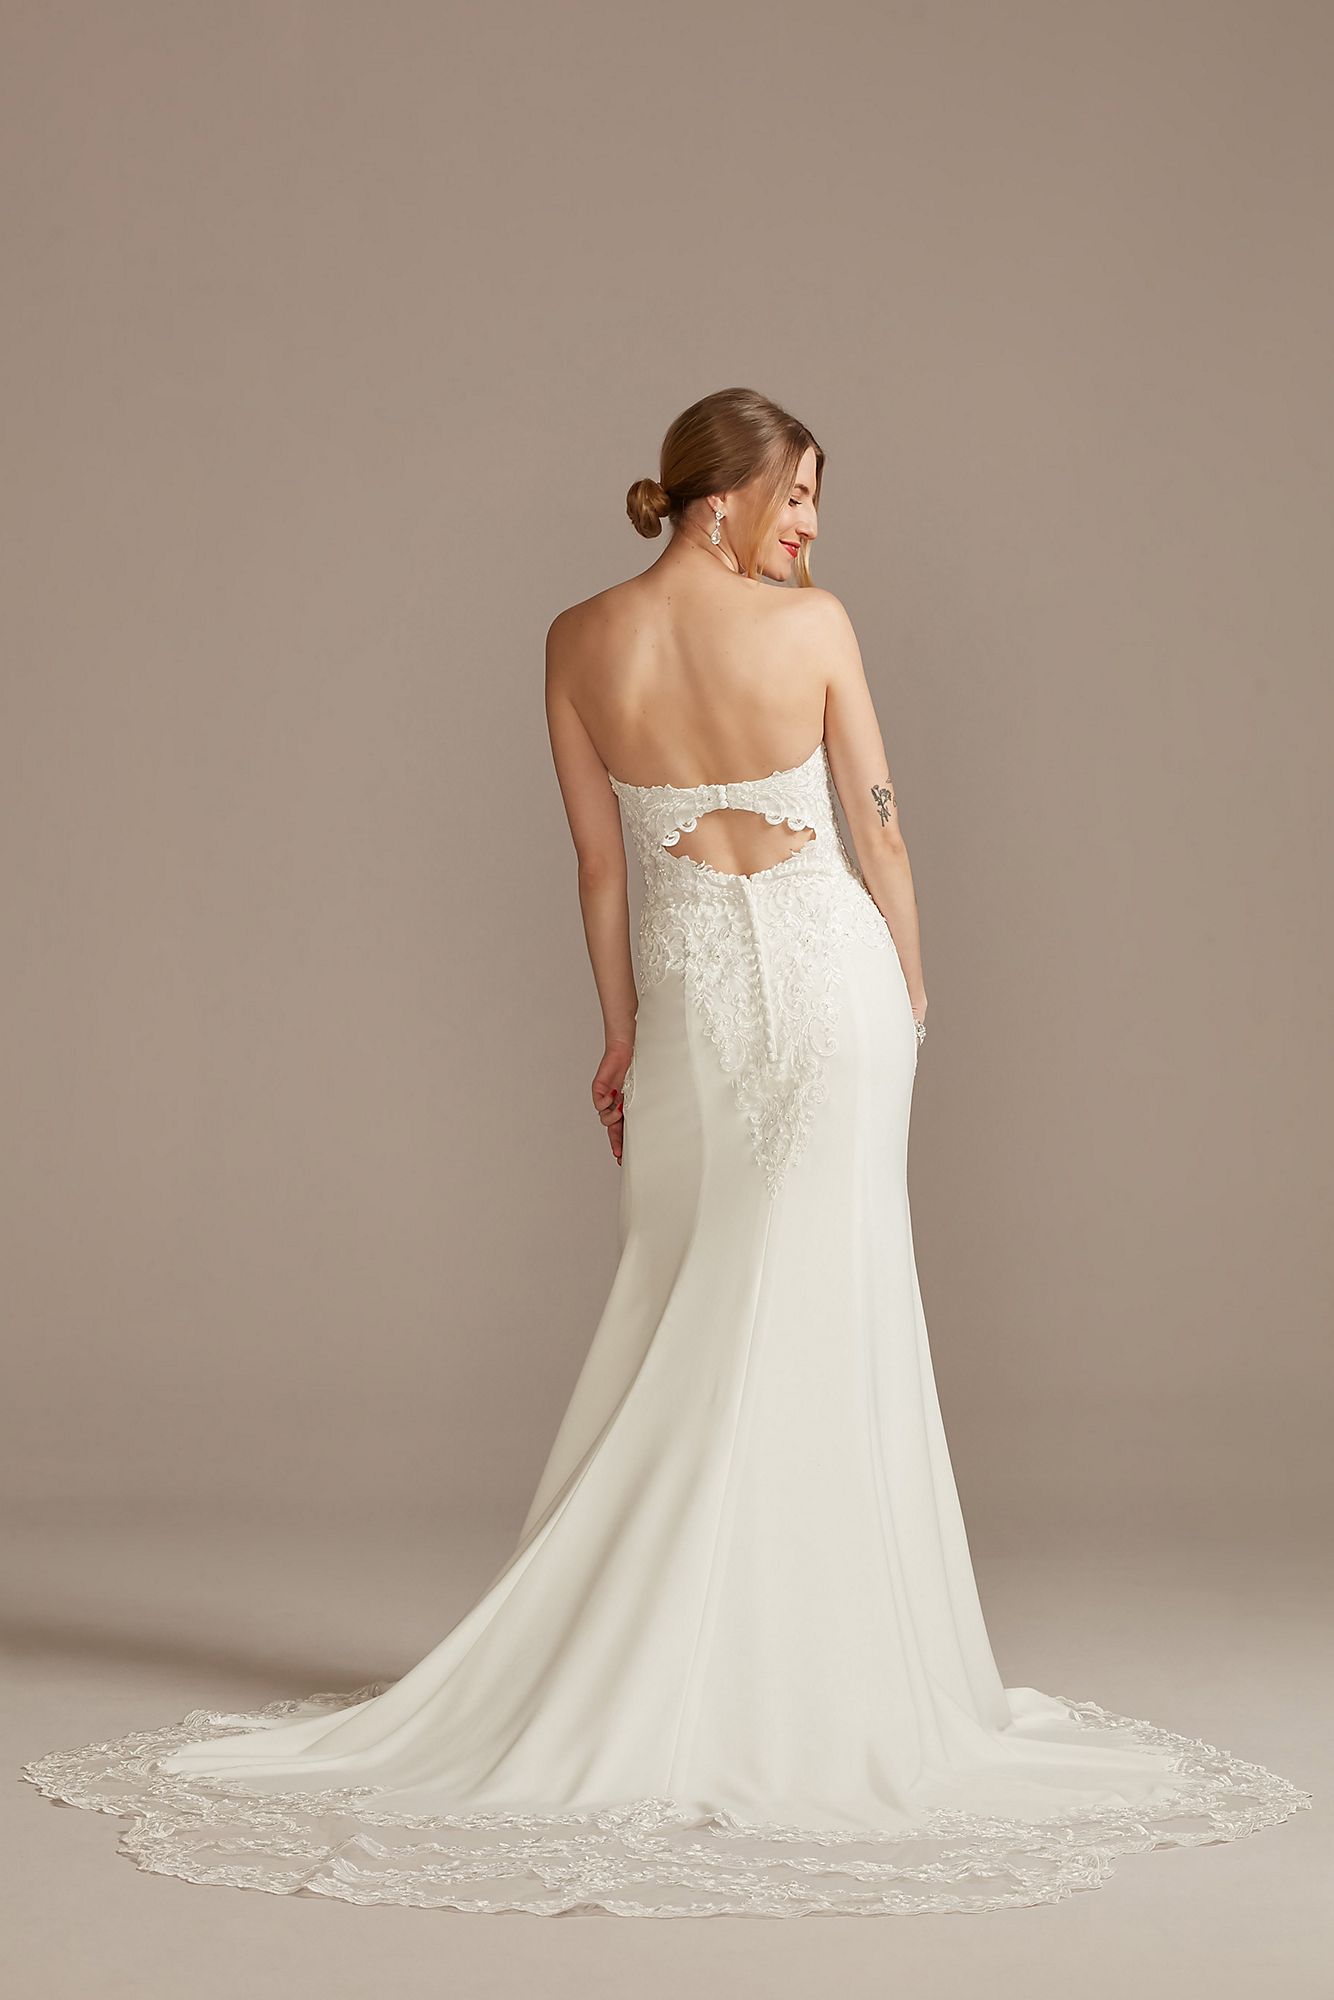 Beaded Lace Petite Wedding Dress with Back Strap Galina Signature 7LBSV830